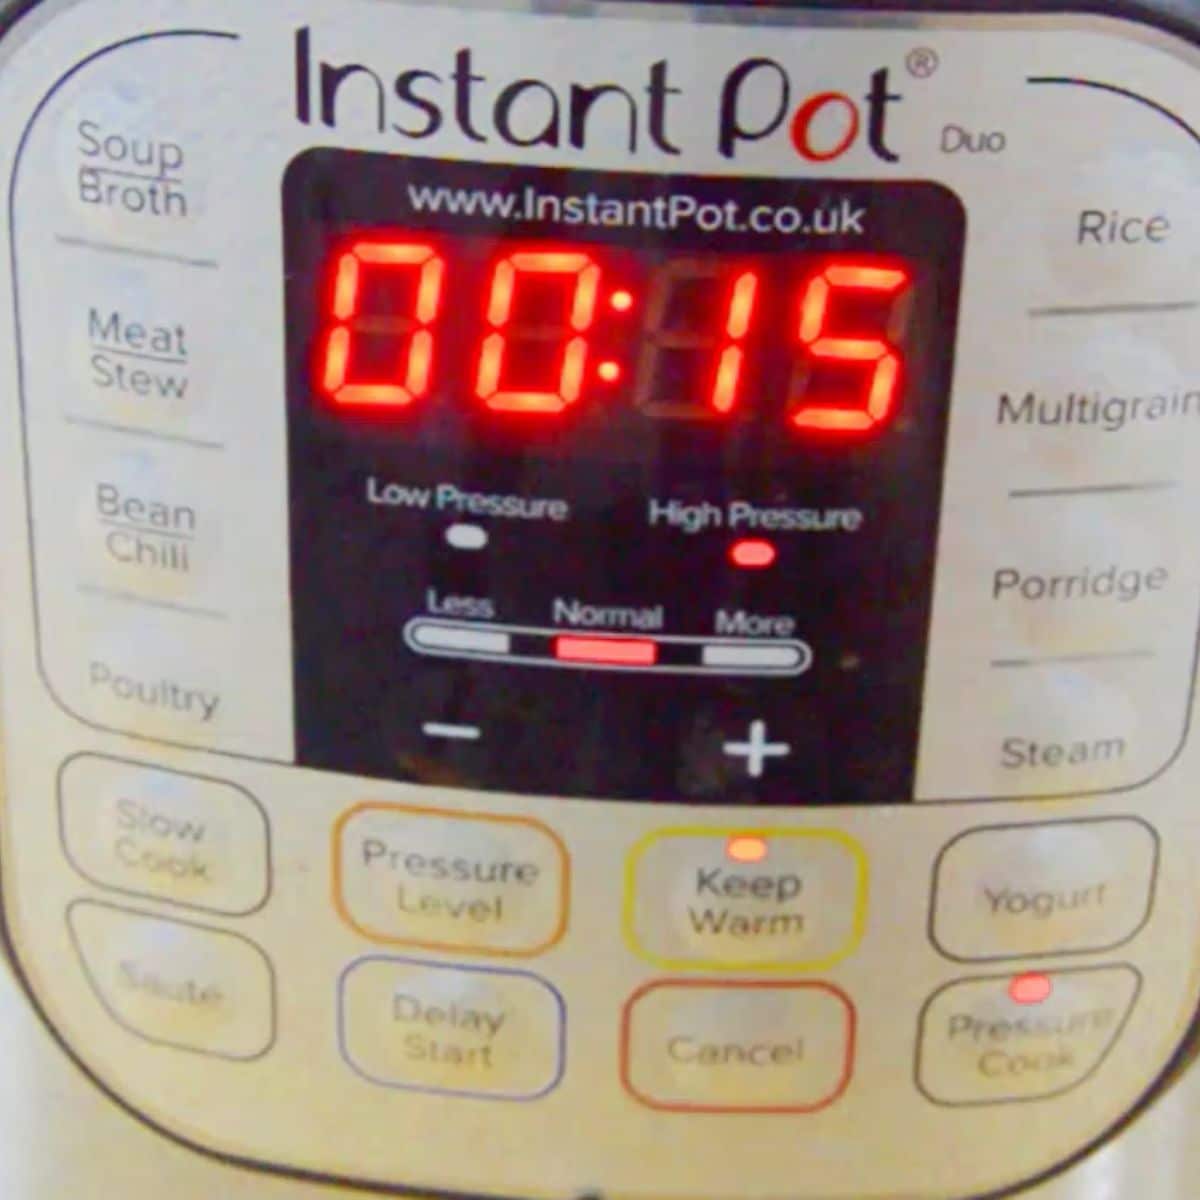 timer of instant pot displaying 15 minutes at high pressure in pressure cook mode. 